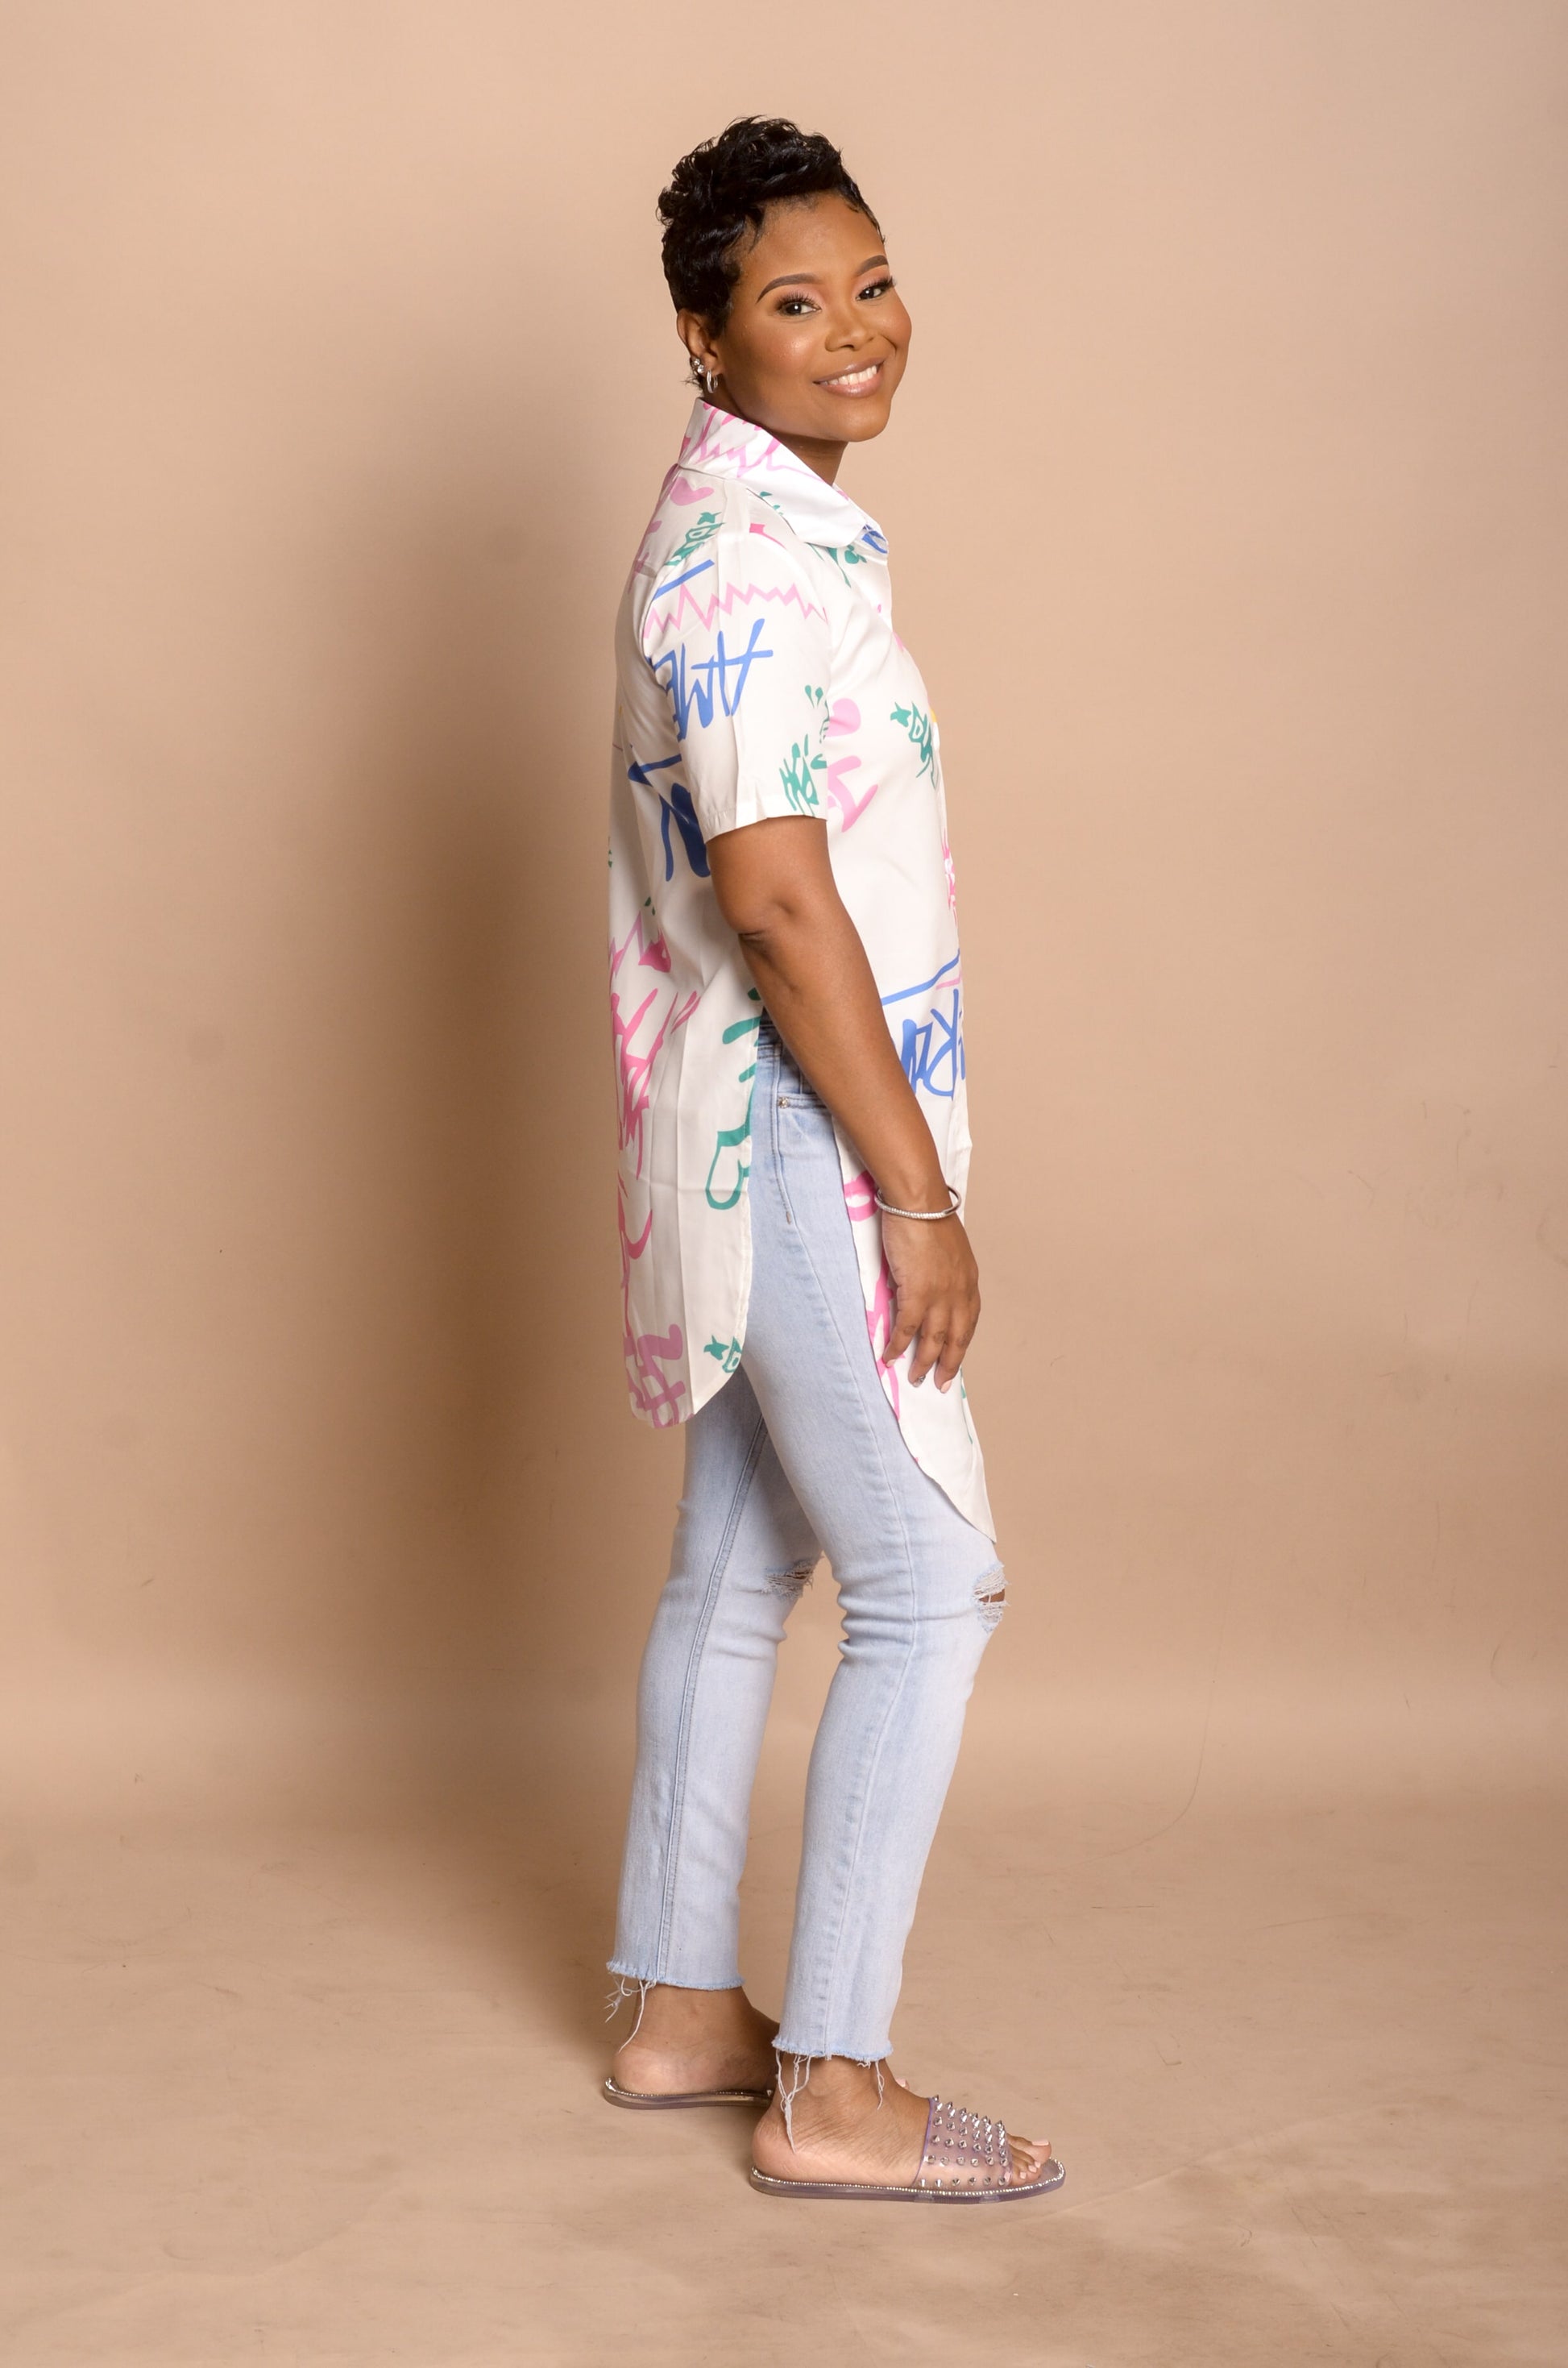 Side view of Graffiti Asymmetrical Top paired with jeans showing long front and short back